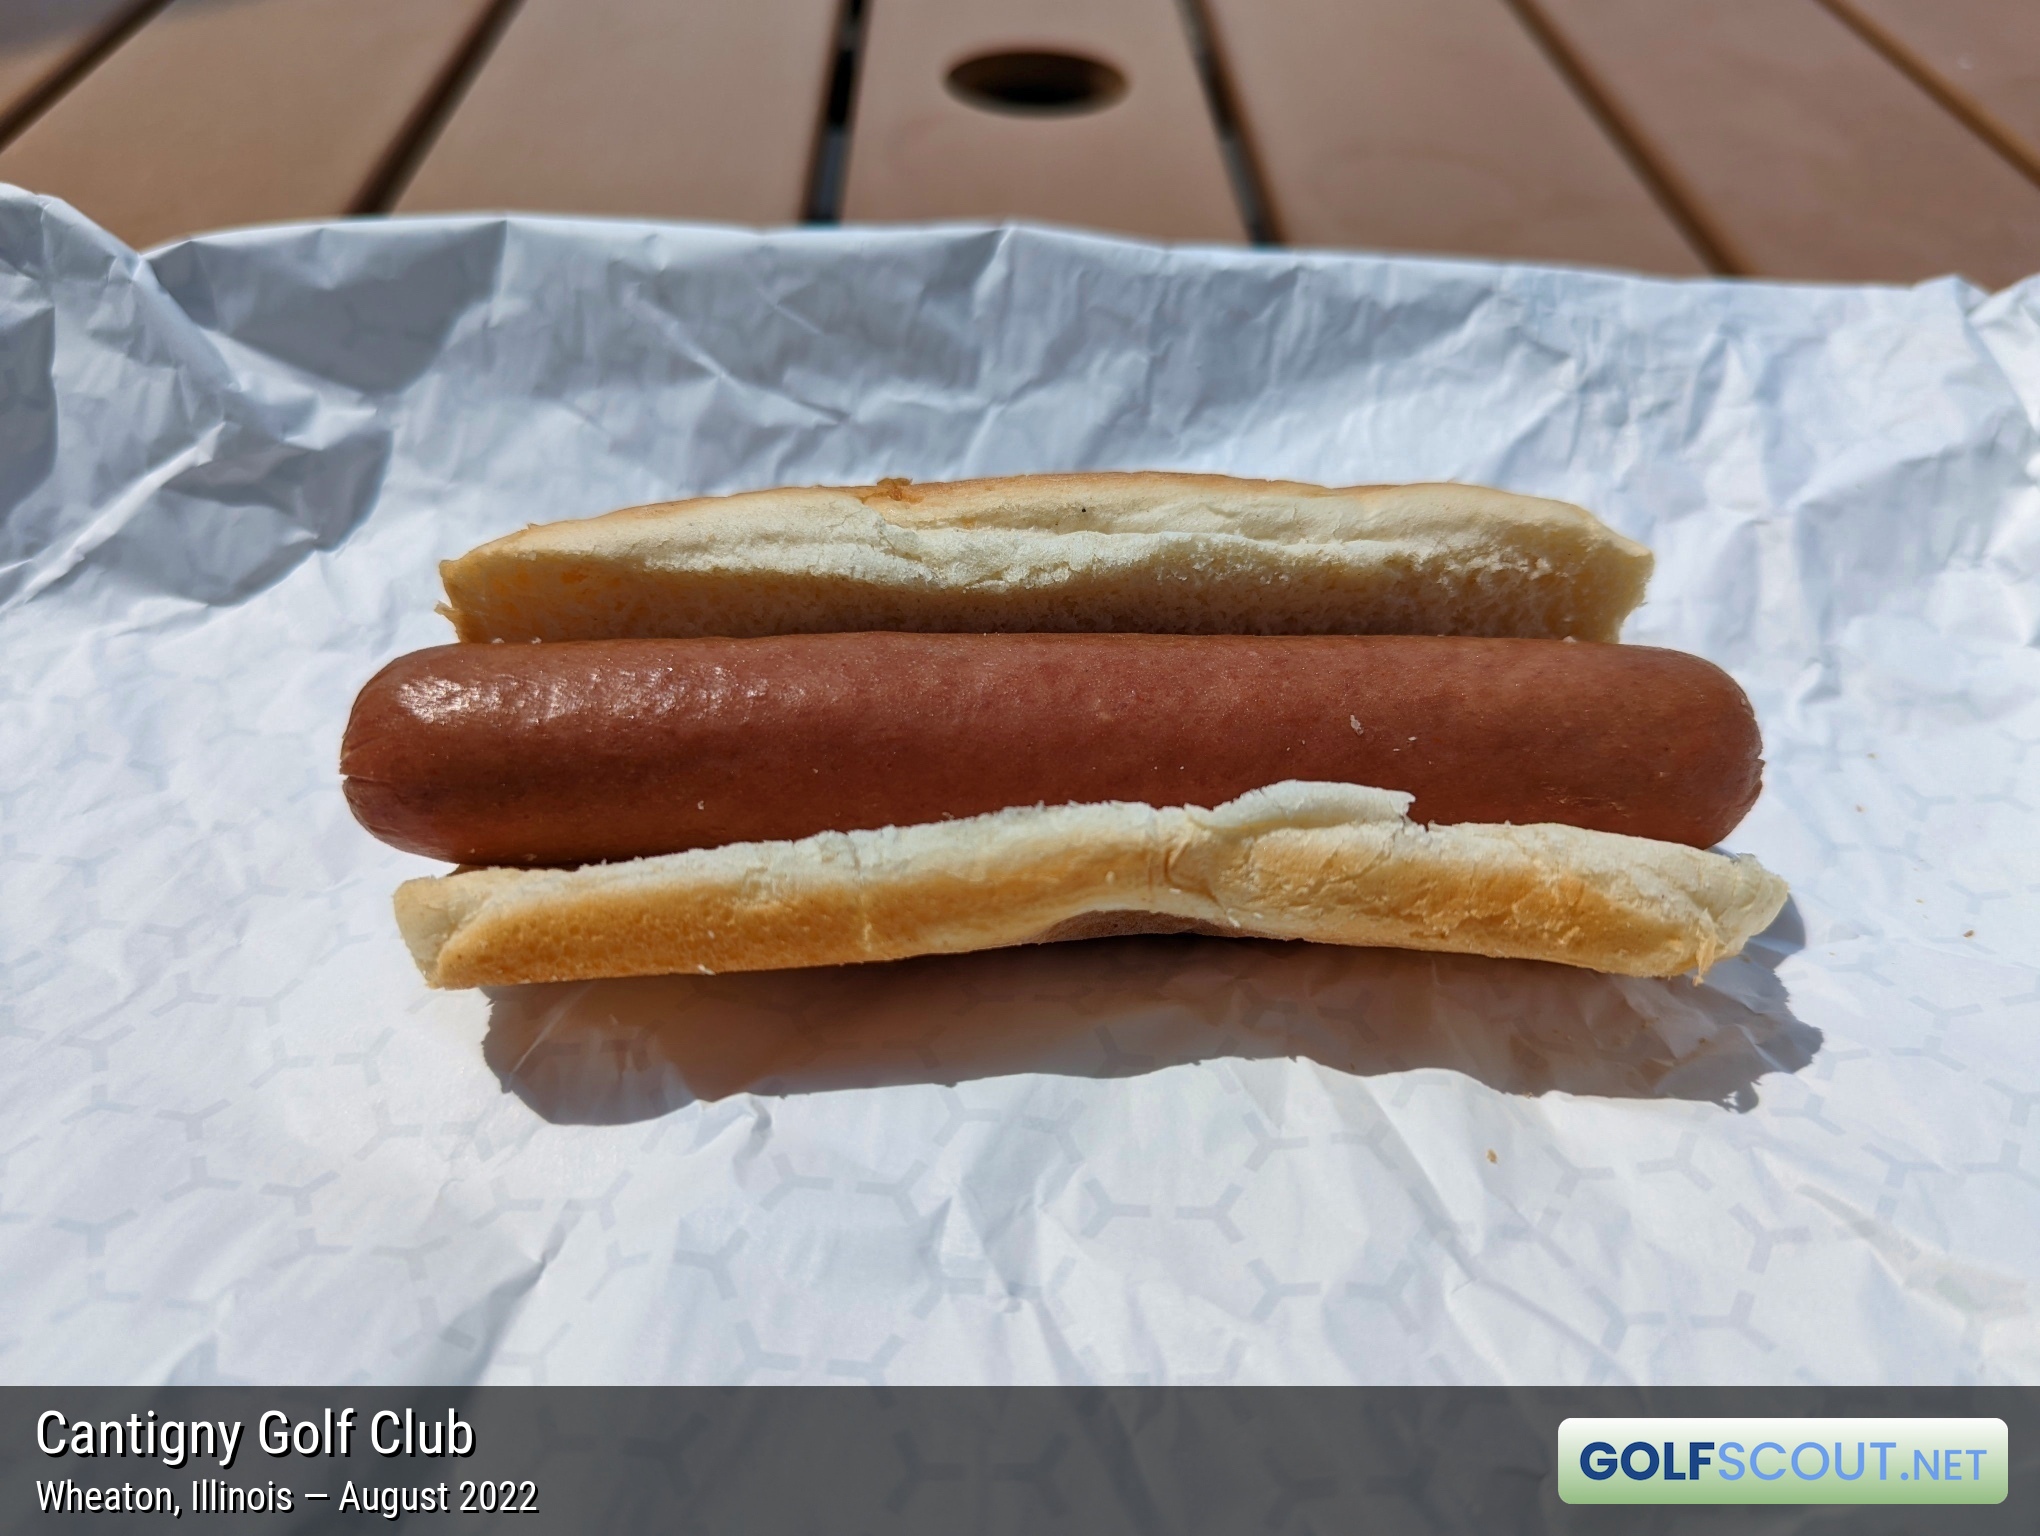 Photo of the food and dining at Cantigny Golf Club in Wheaton, Illinois. Photo of the hot dog at Cantigny Golf Club in Wheaton, Illinois.